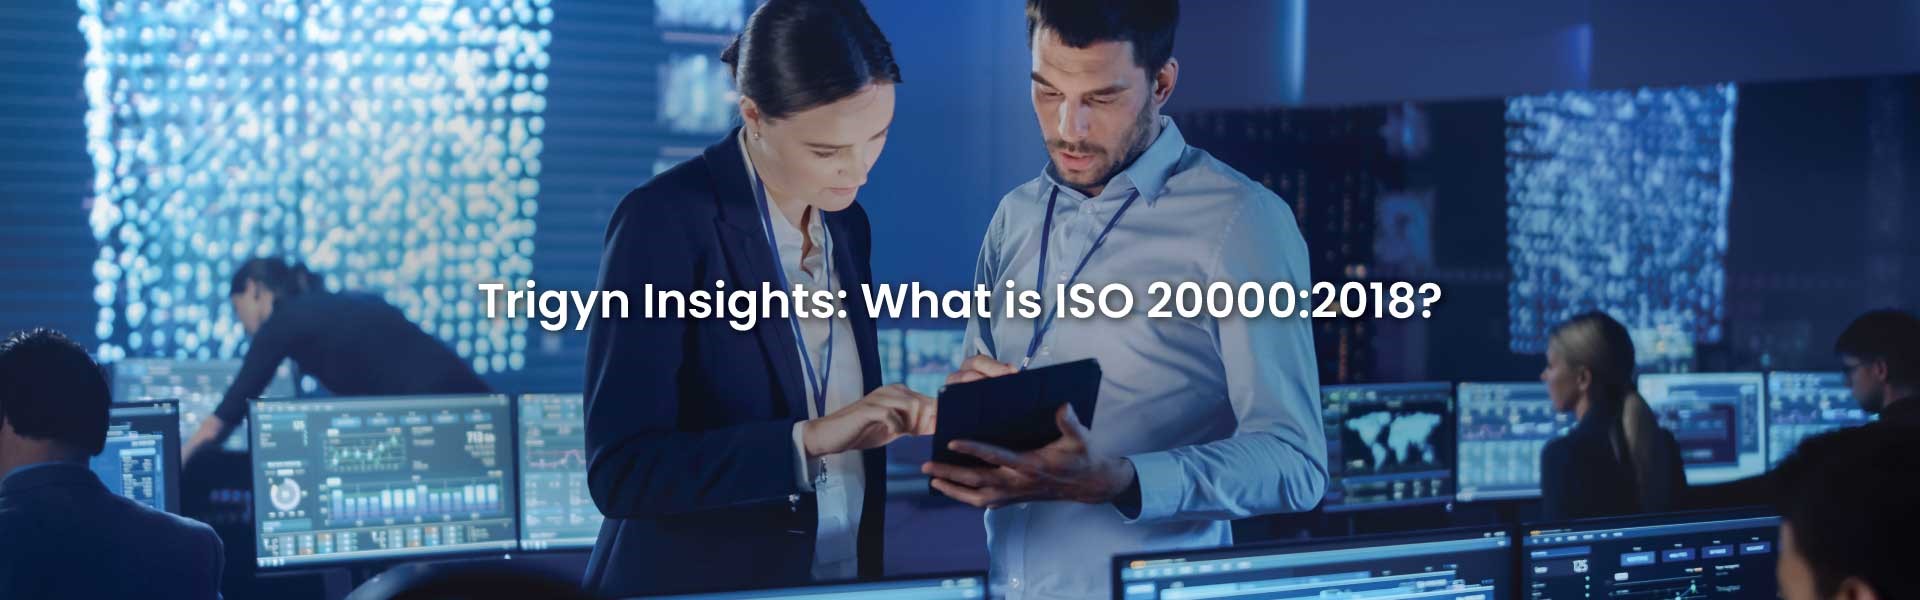 What is ISO 20000:2018